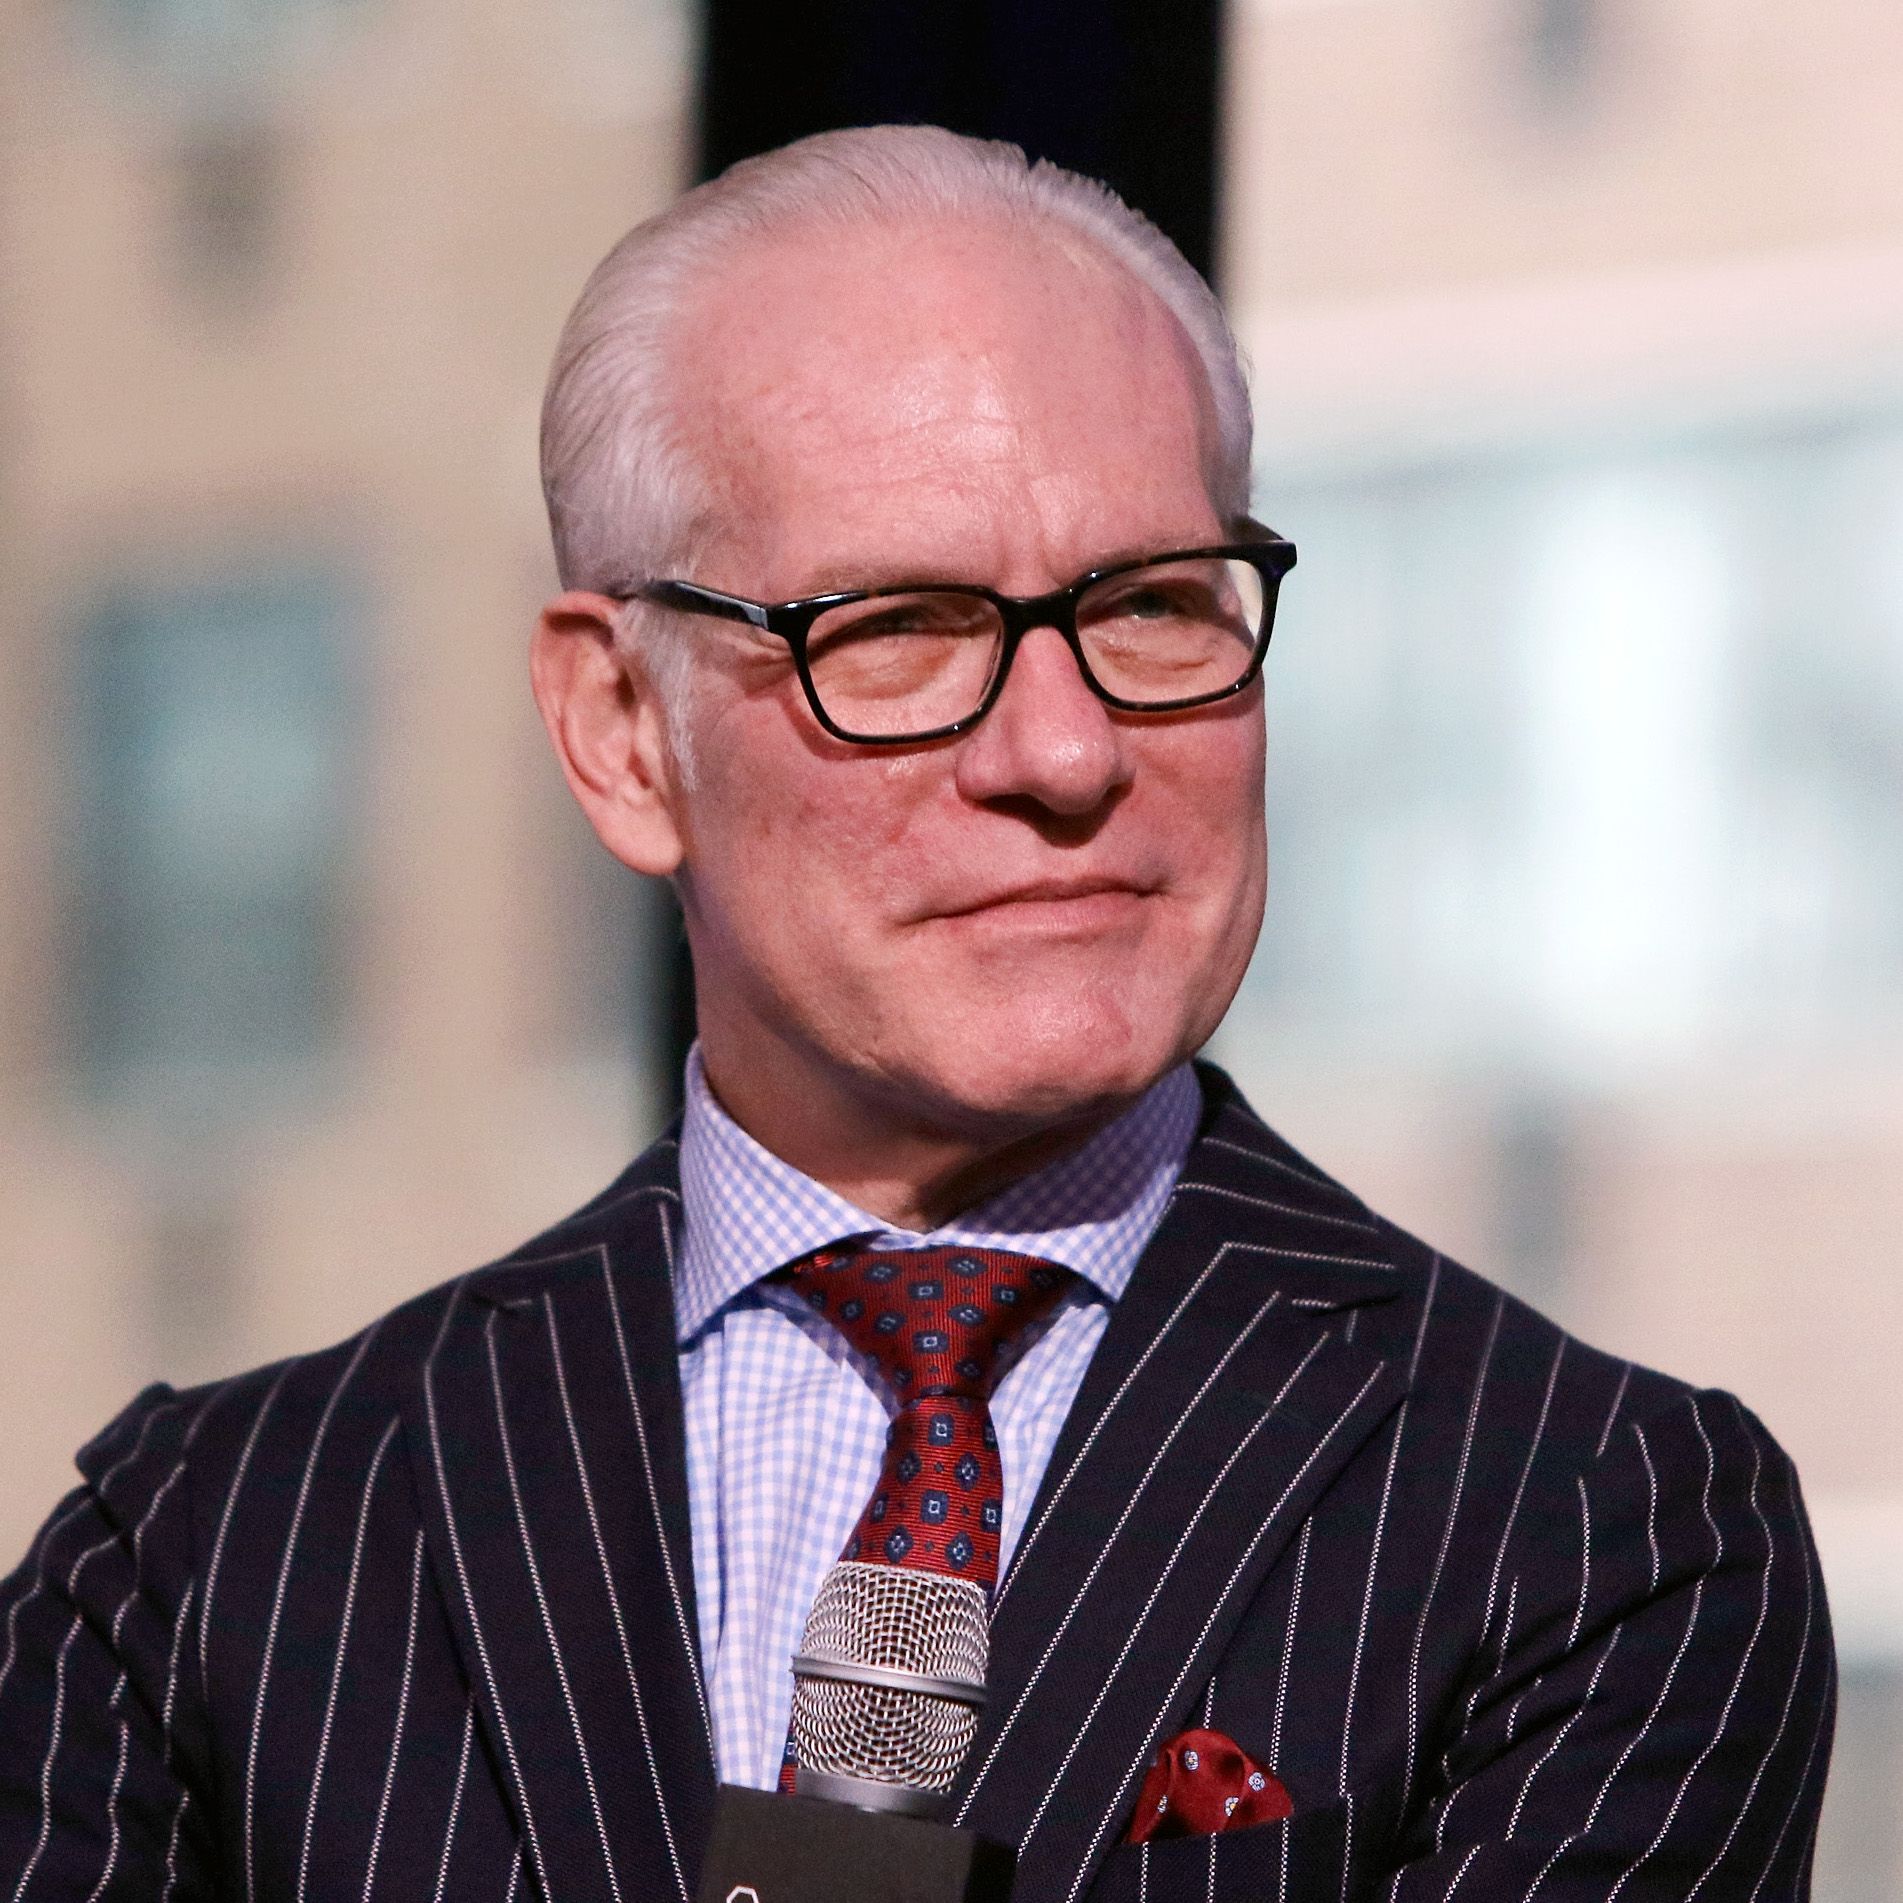 Where Is Tim Gunn From Project Runway? - Why Tim Gunn Is Not Project Runway